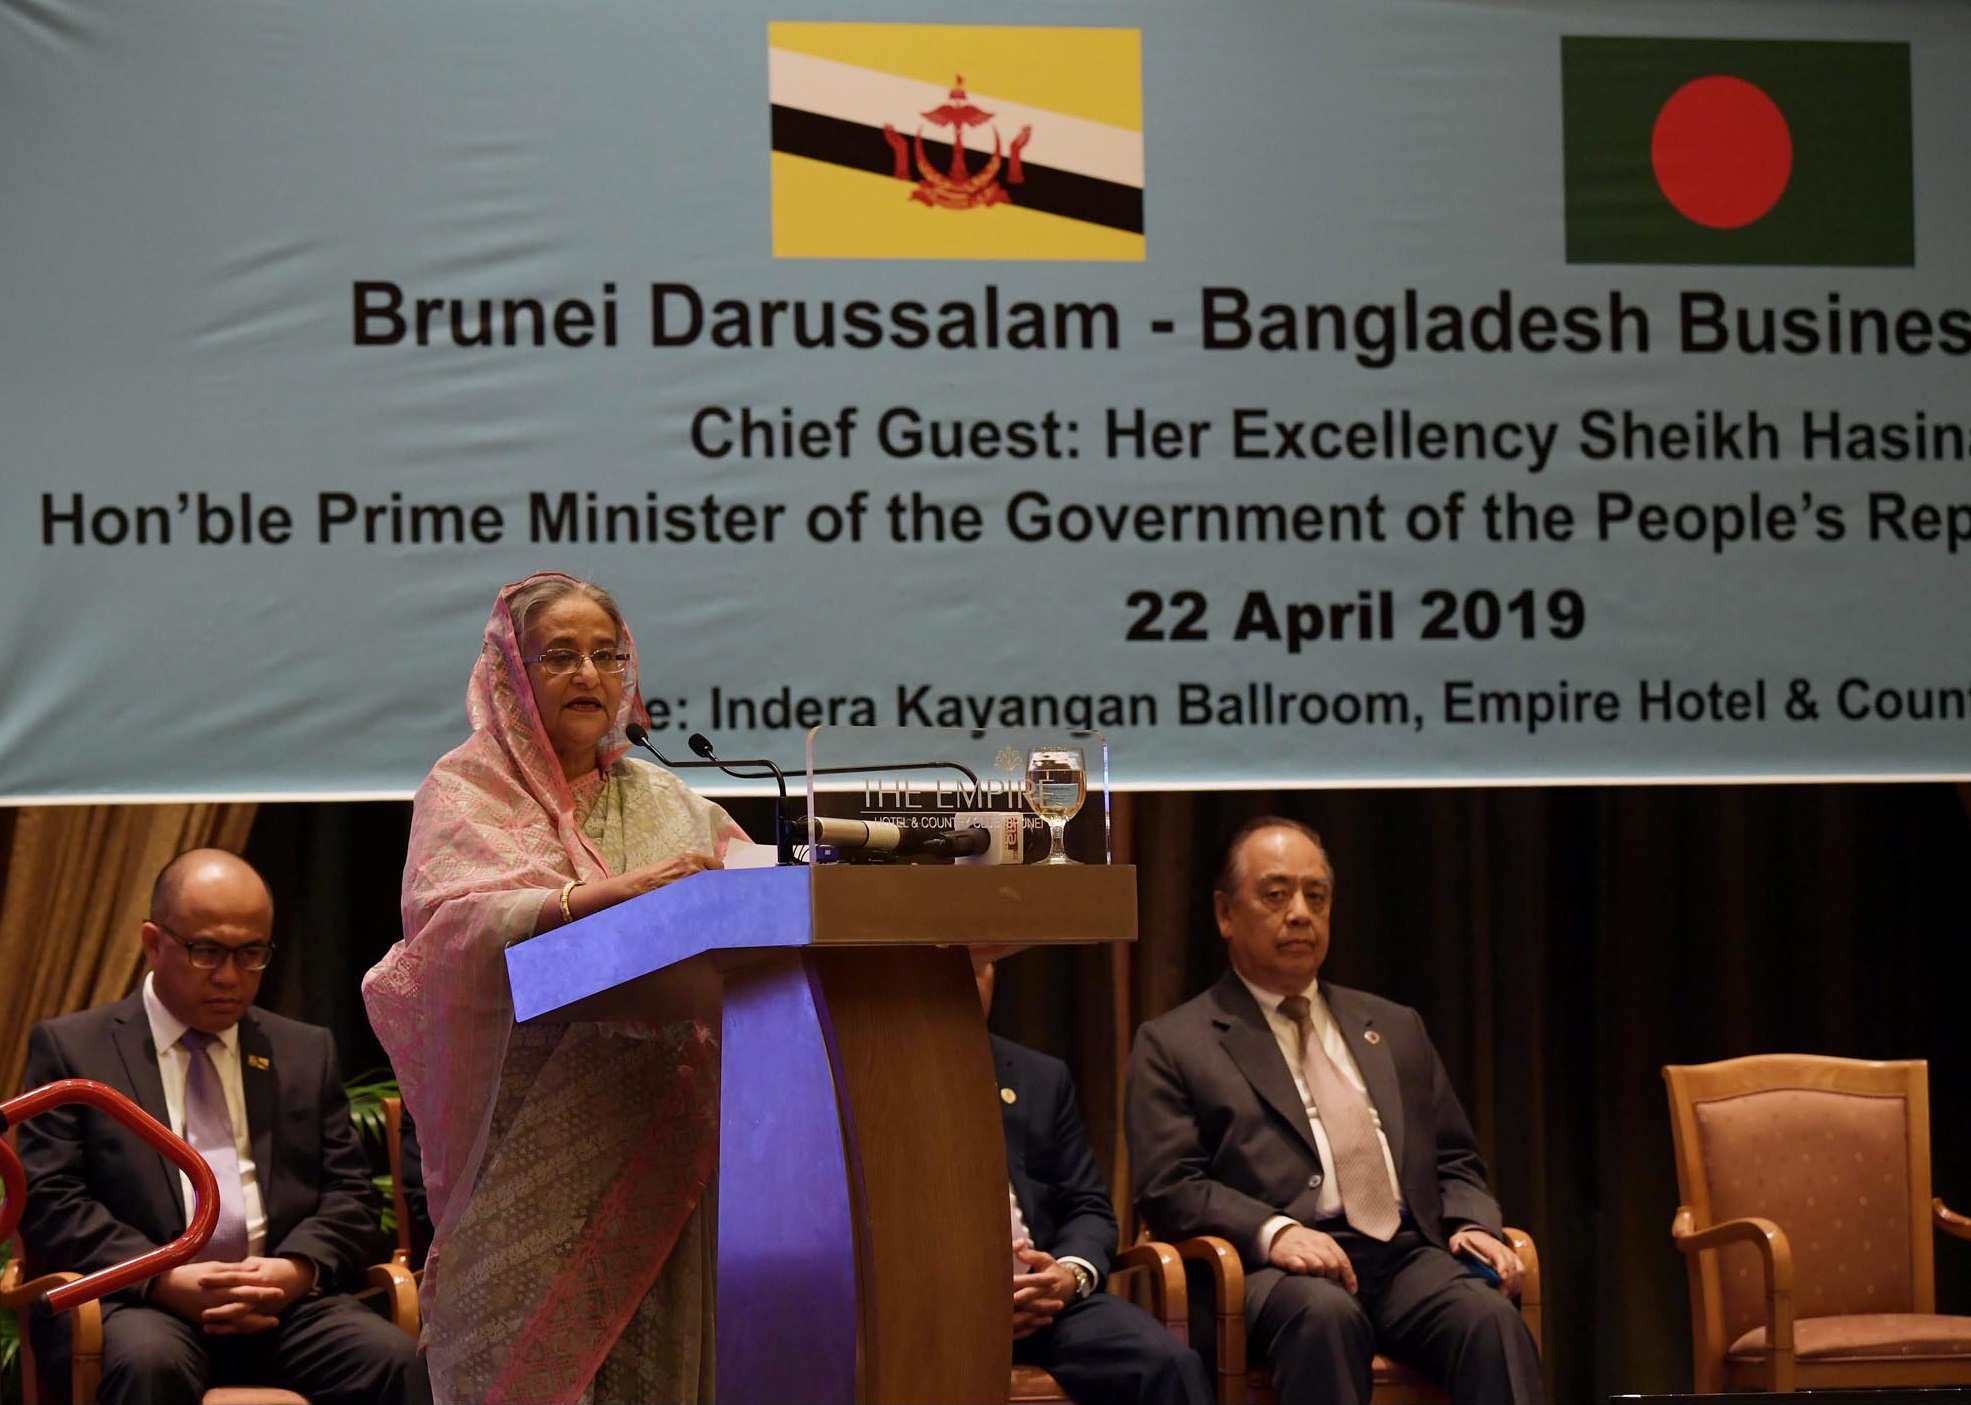 Bangladesh PM Sheikh Hasina urges Brunei businessmen to invest in her country